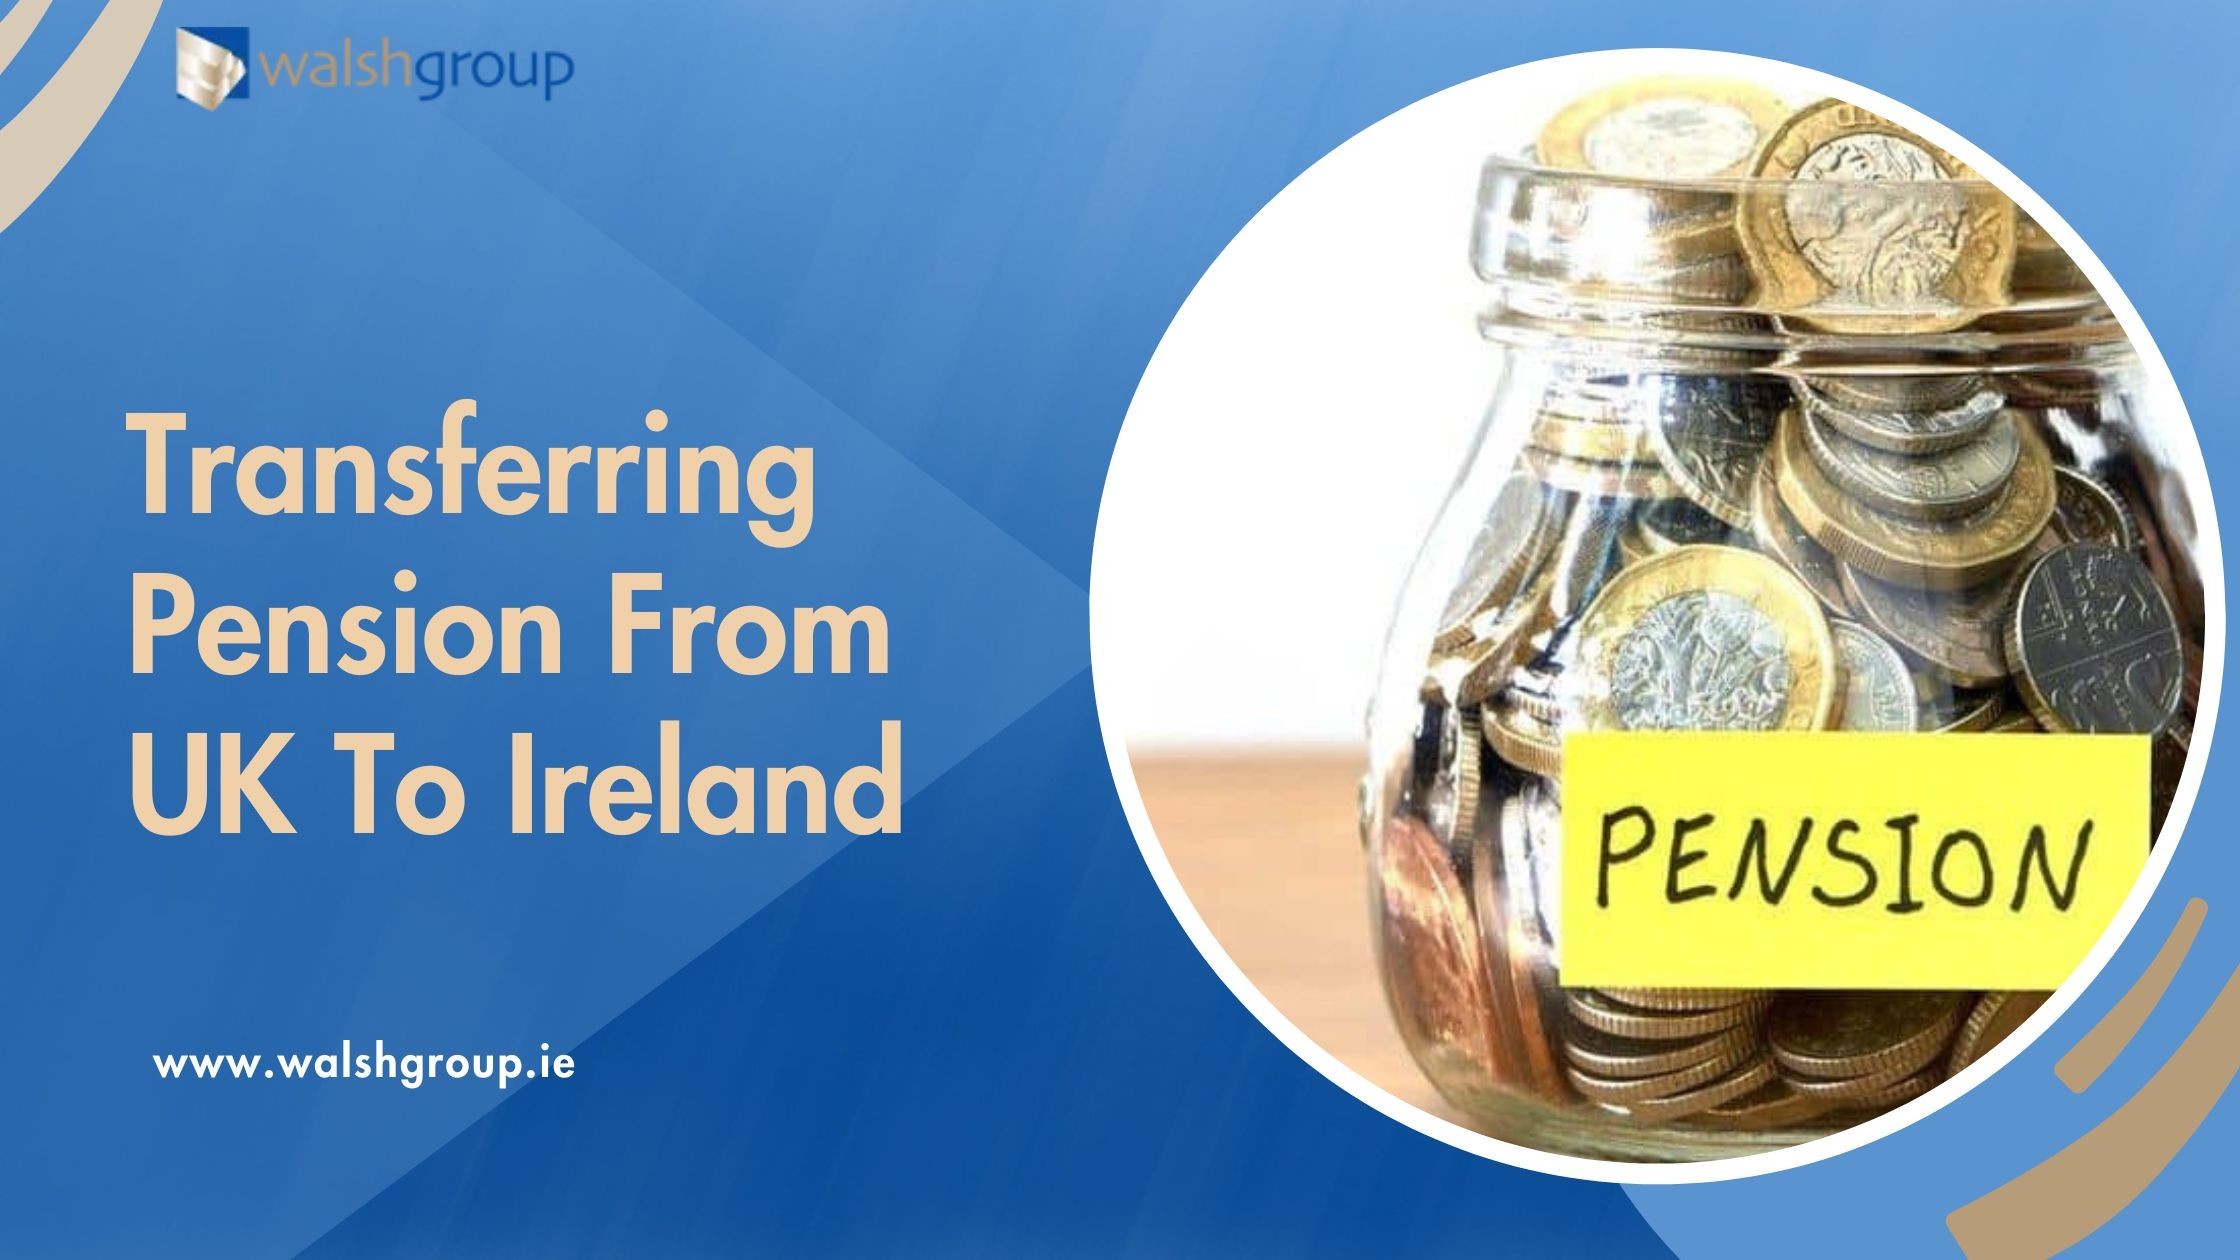 Transferring Pension From UK To Ireland